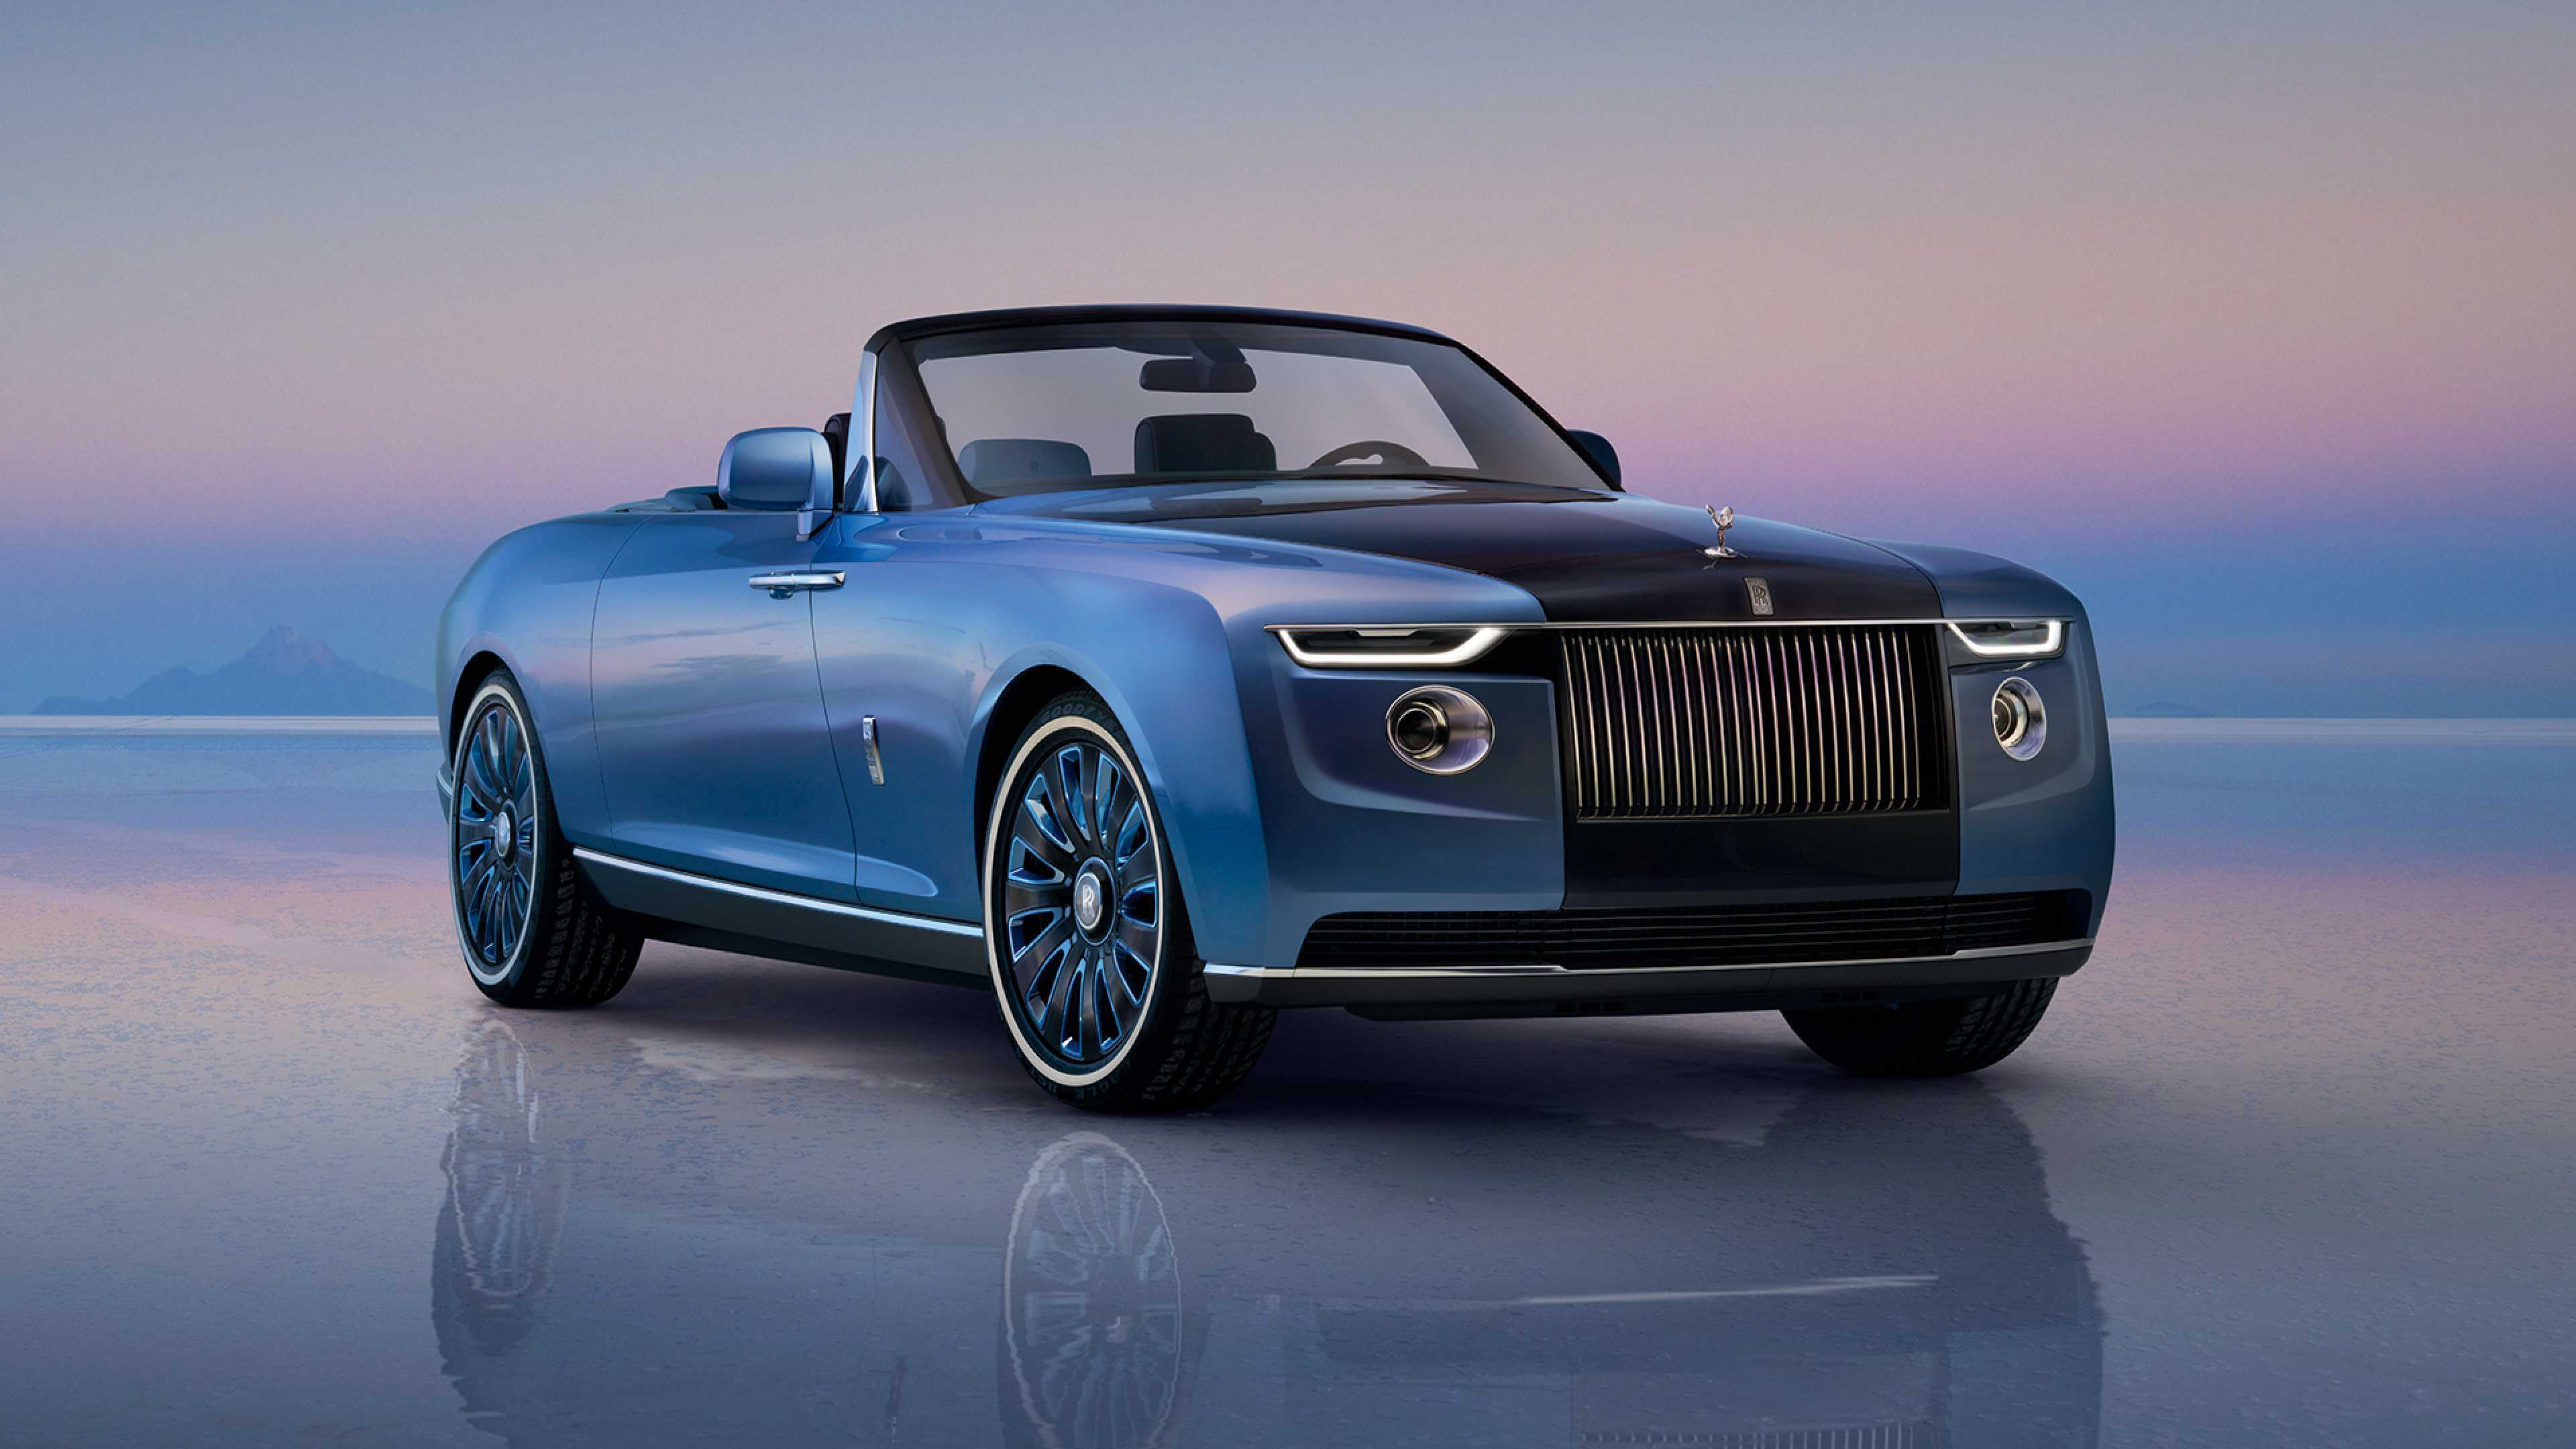 Meet the most expensive RollsRoyce ever Square Mile